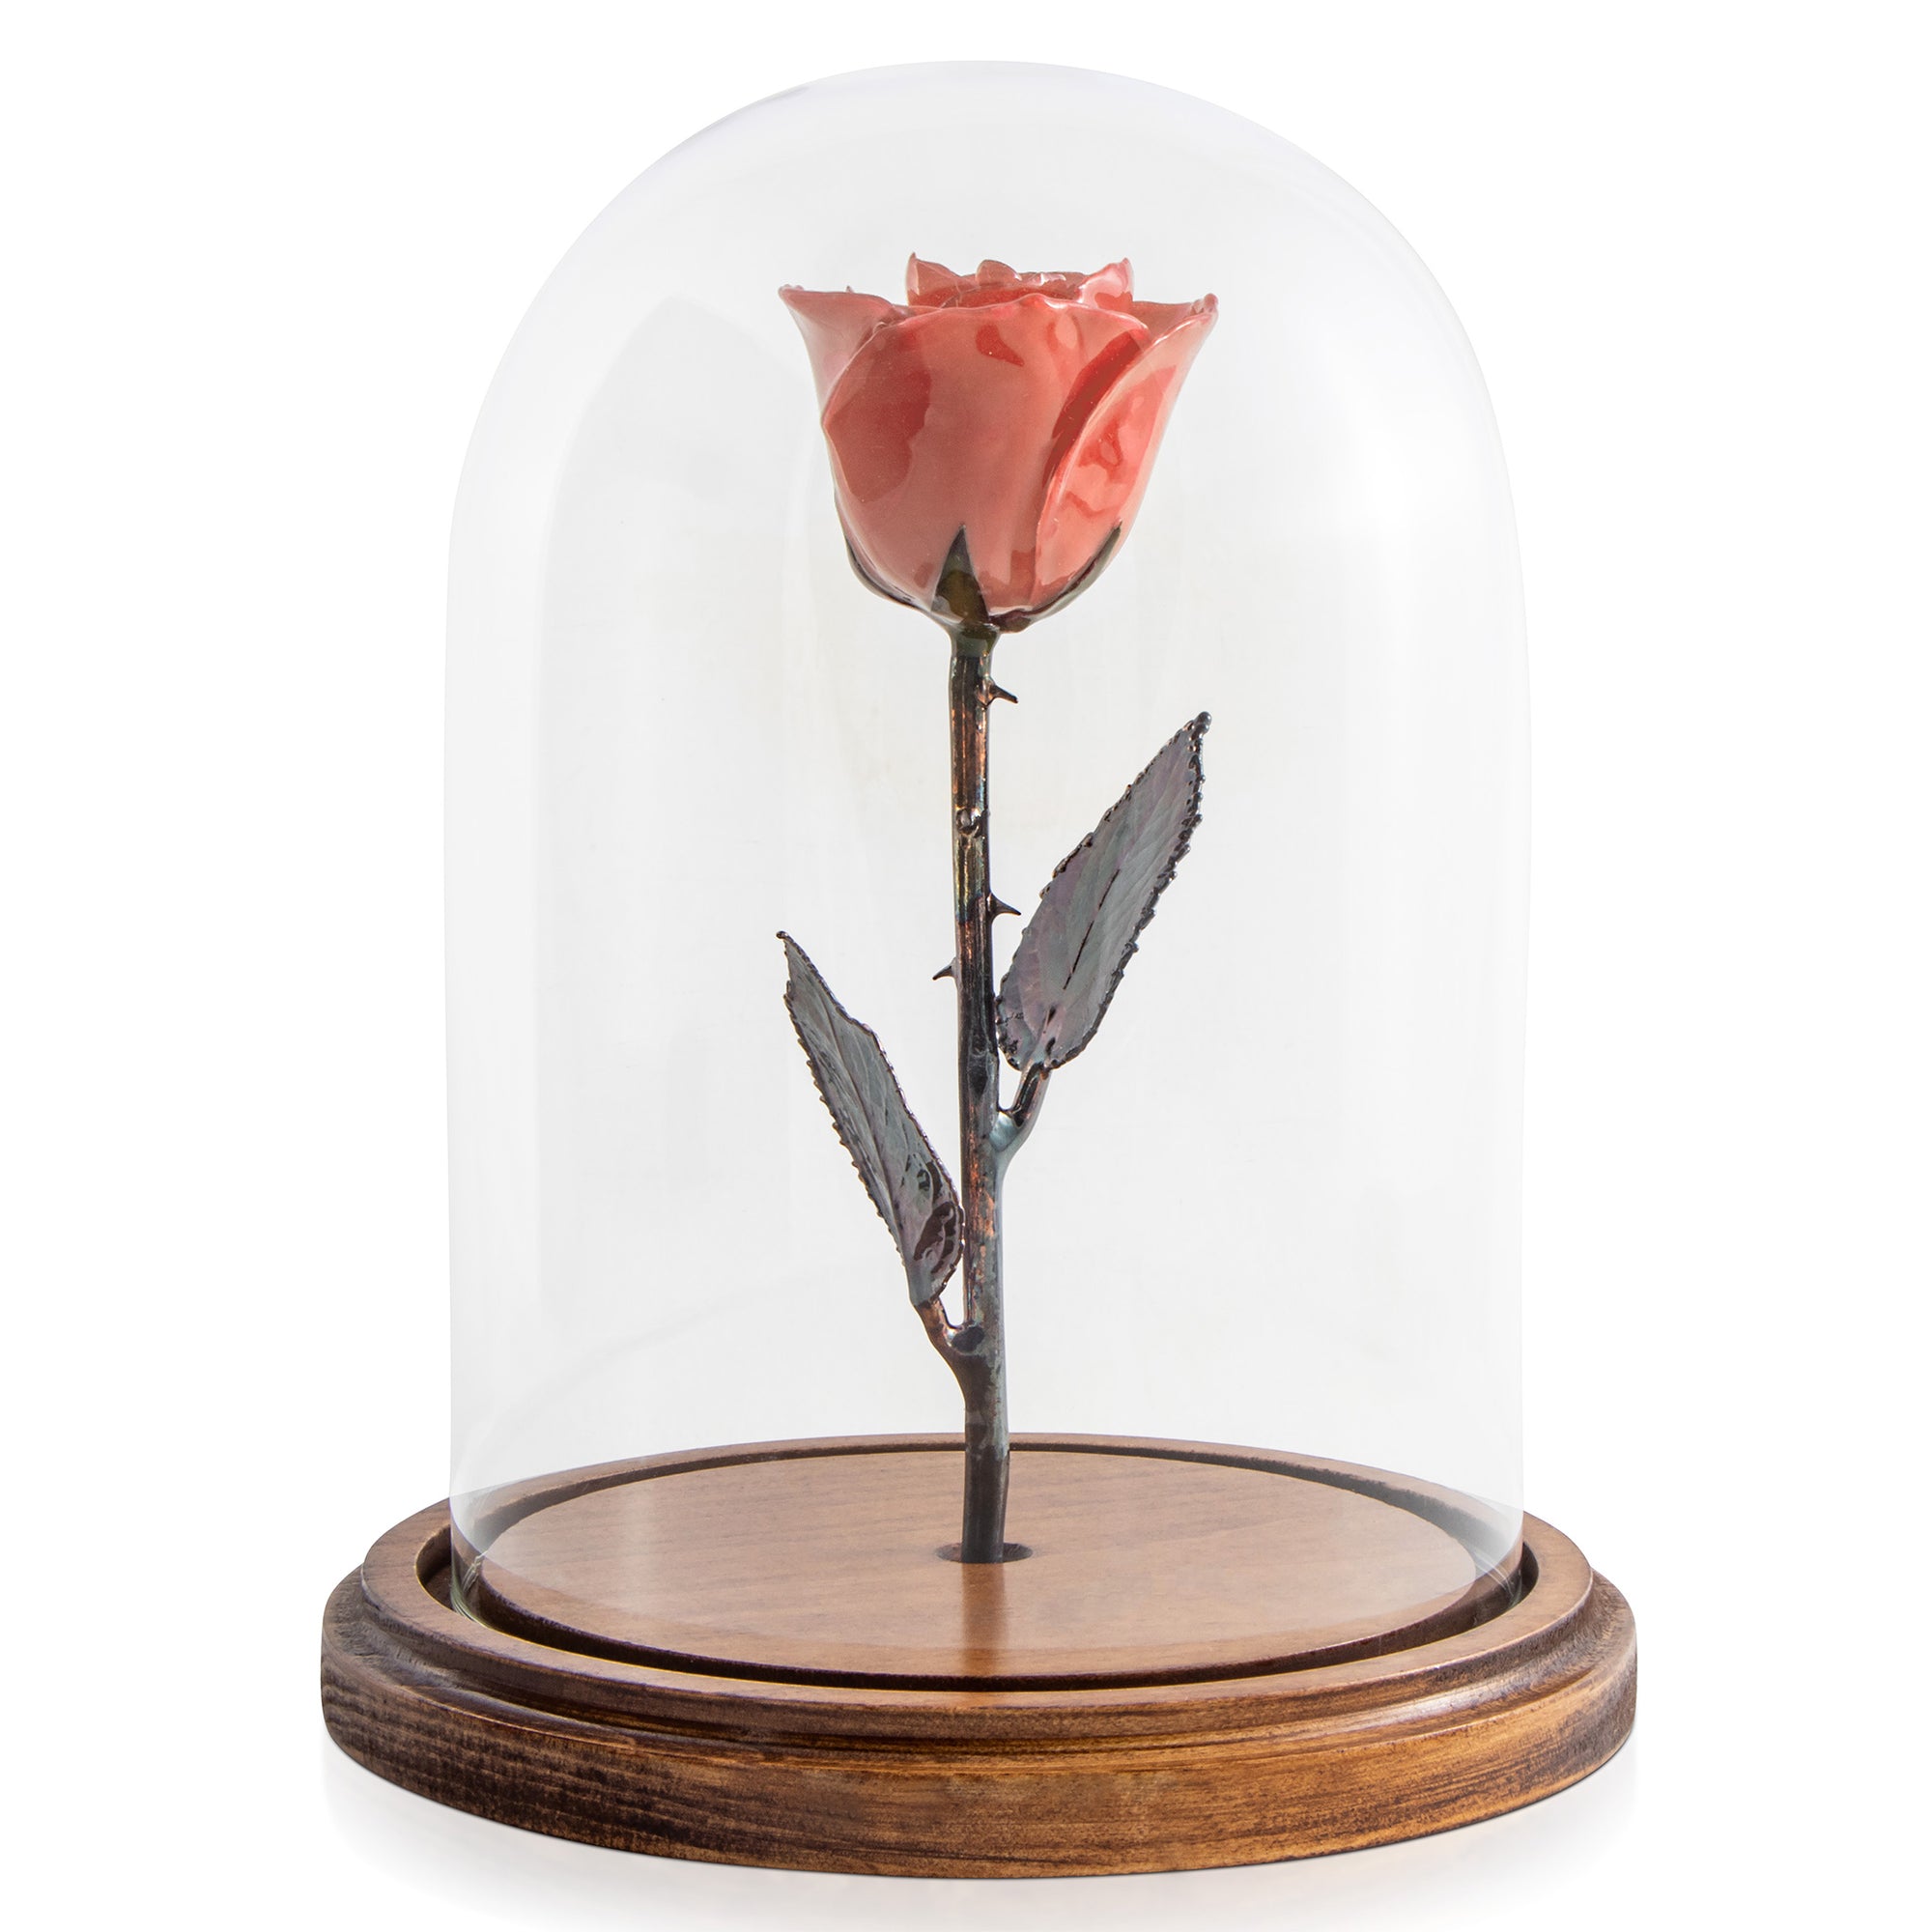 Pink Enchanted Rose (aka Beauty & The Beast Rose) with Patina Copper Stem Mounted to A Hand Turned Solid Wood Base under a glass dome.